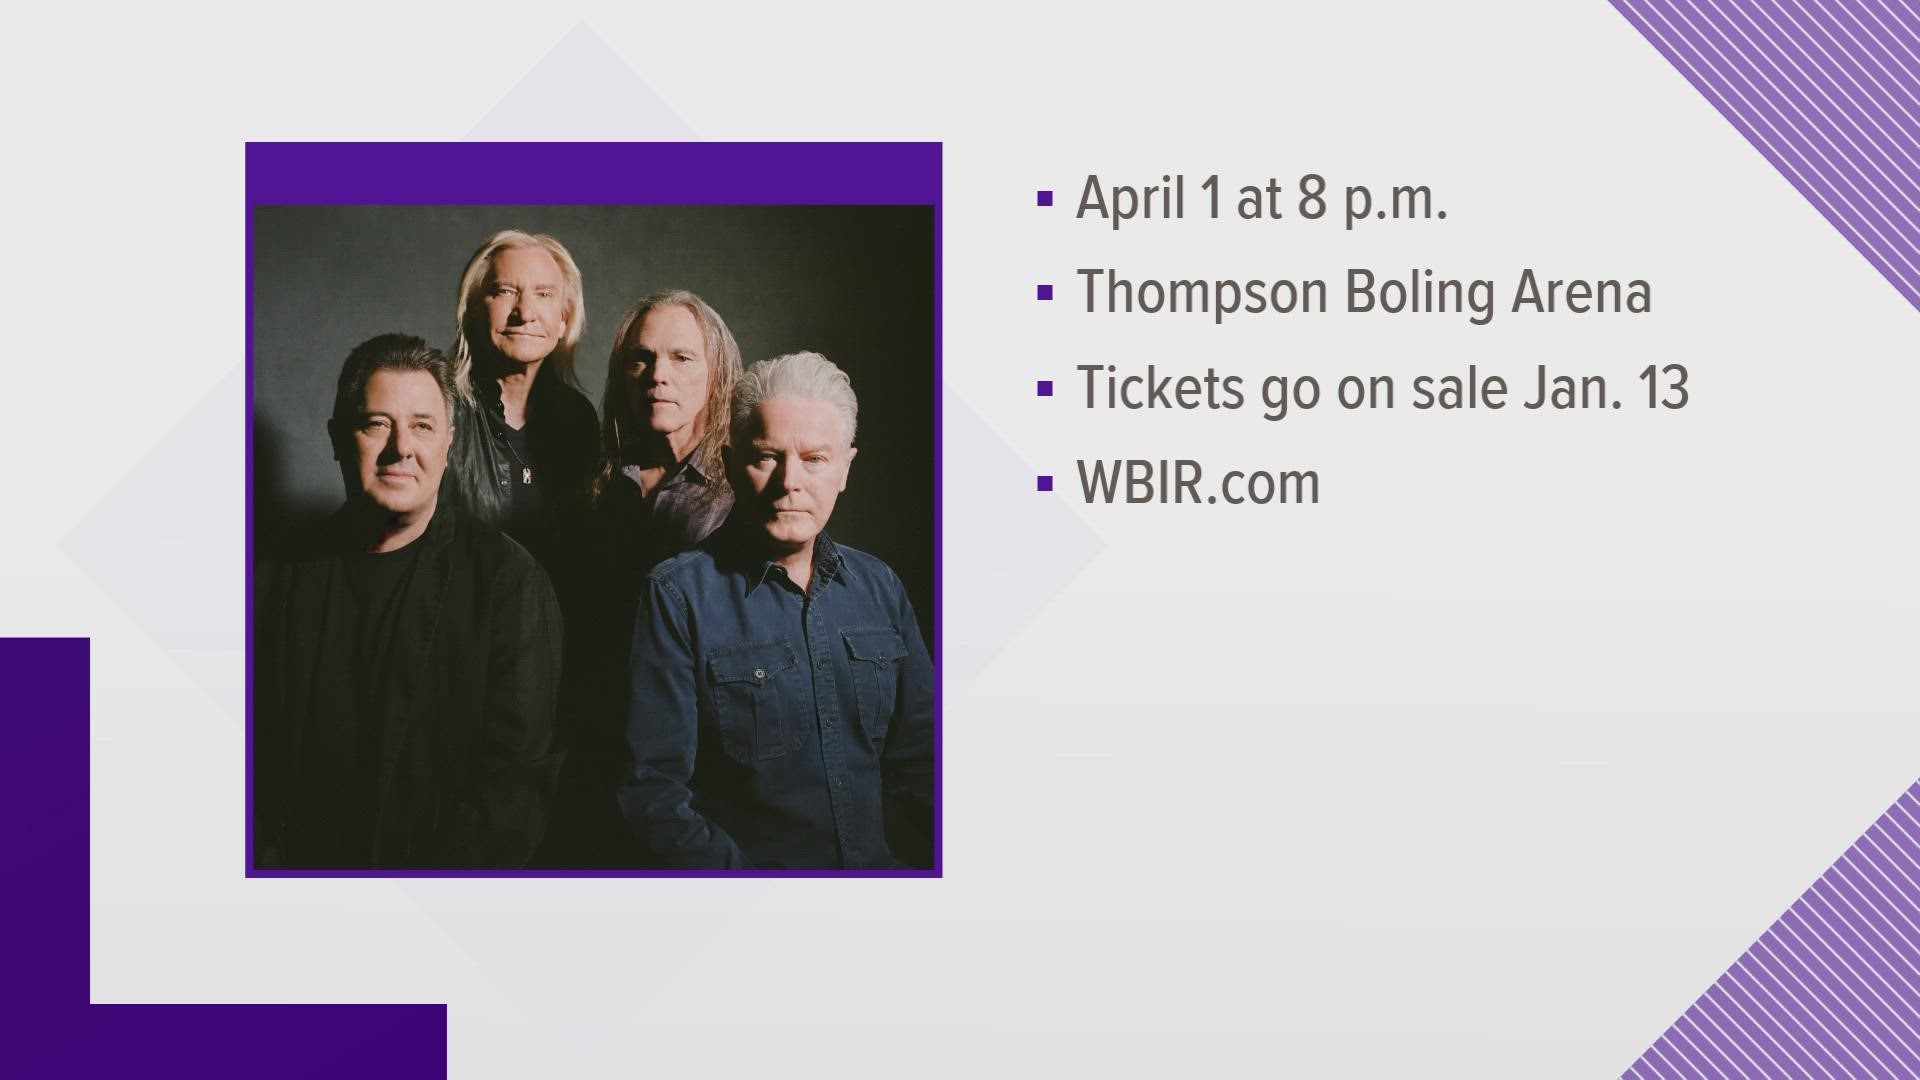 The Eagles will be in town on April 1, the show will start at 8 p.m. Tickets go on sale starting next Friday at 10 a.m.